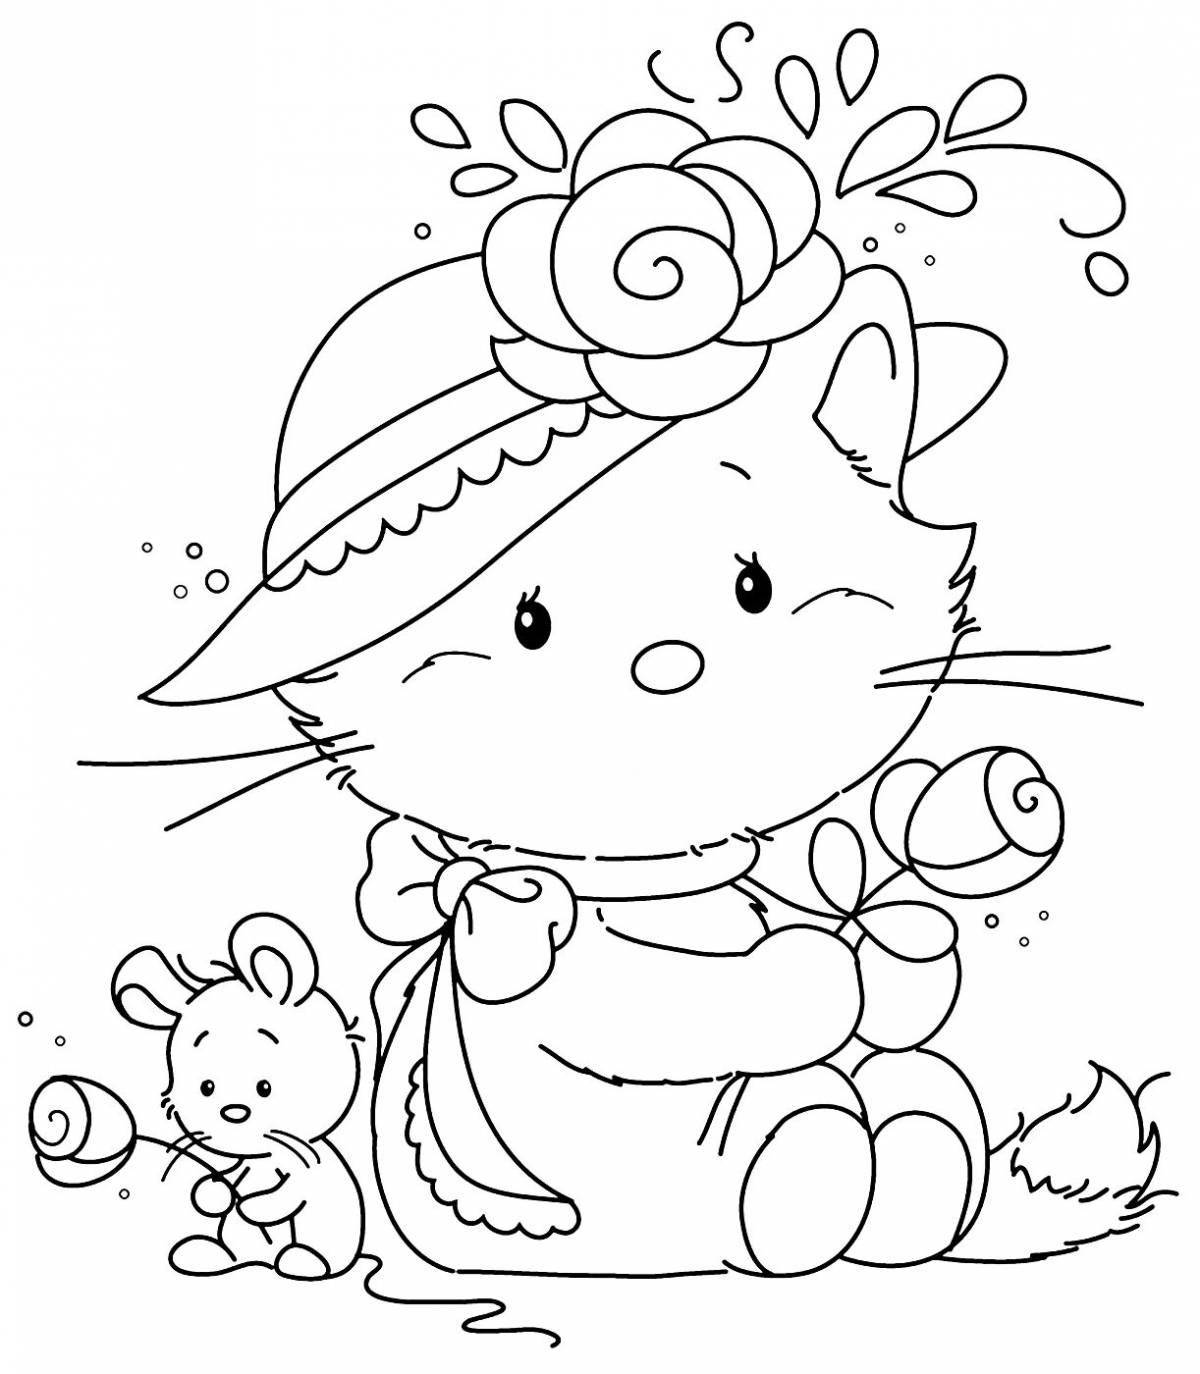 Coloring page cute perch